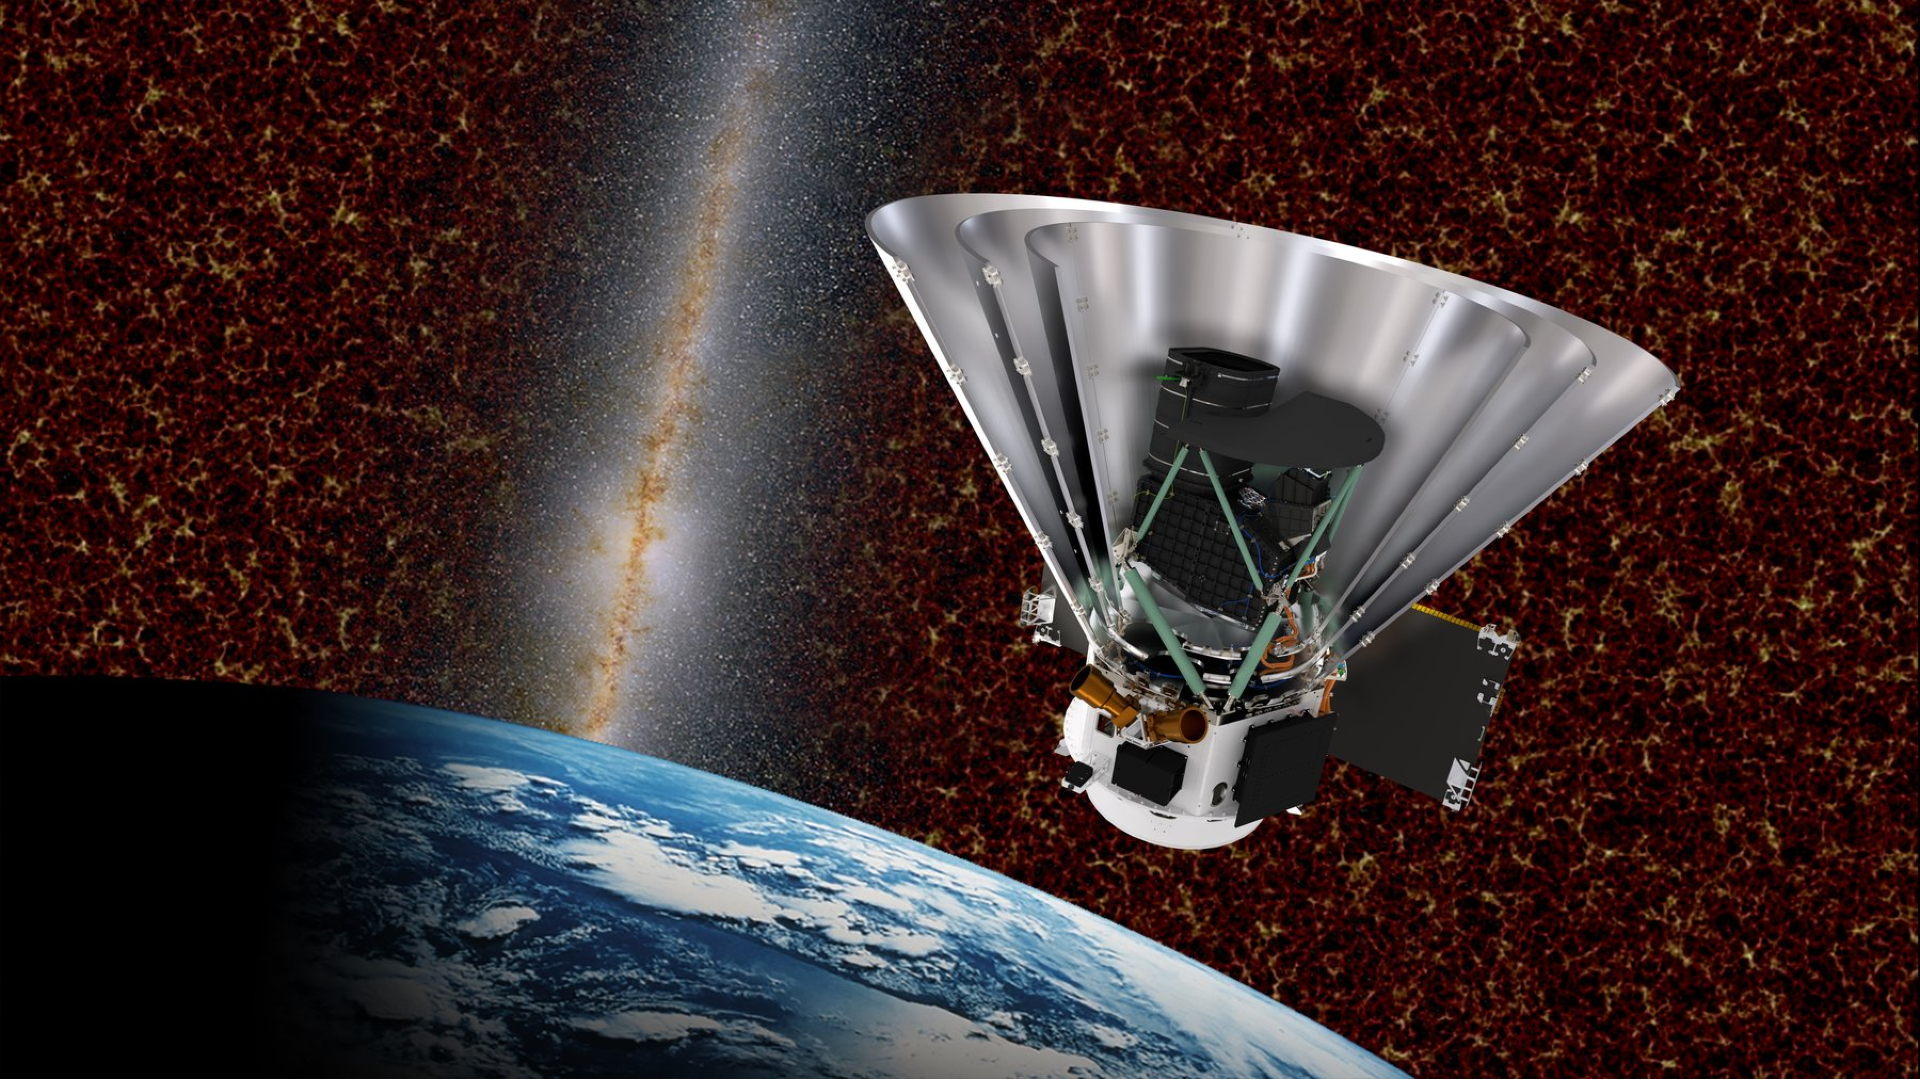 NASA’s SPHEREx mission aims to map 450 million galaxies and 100 million stars Space